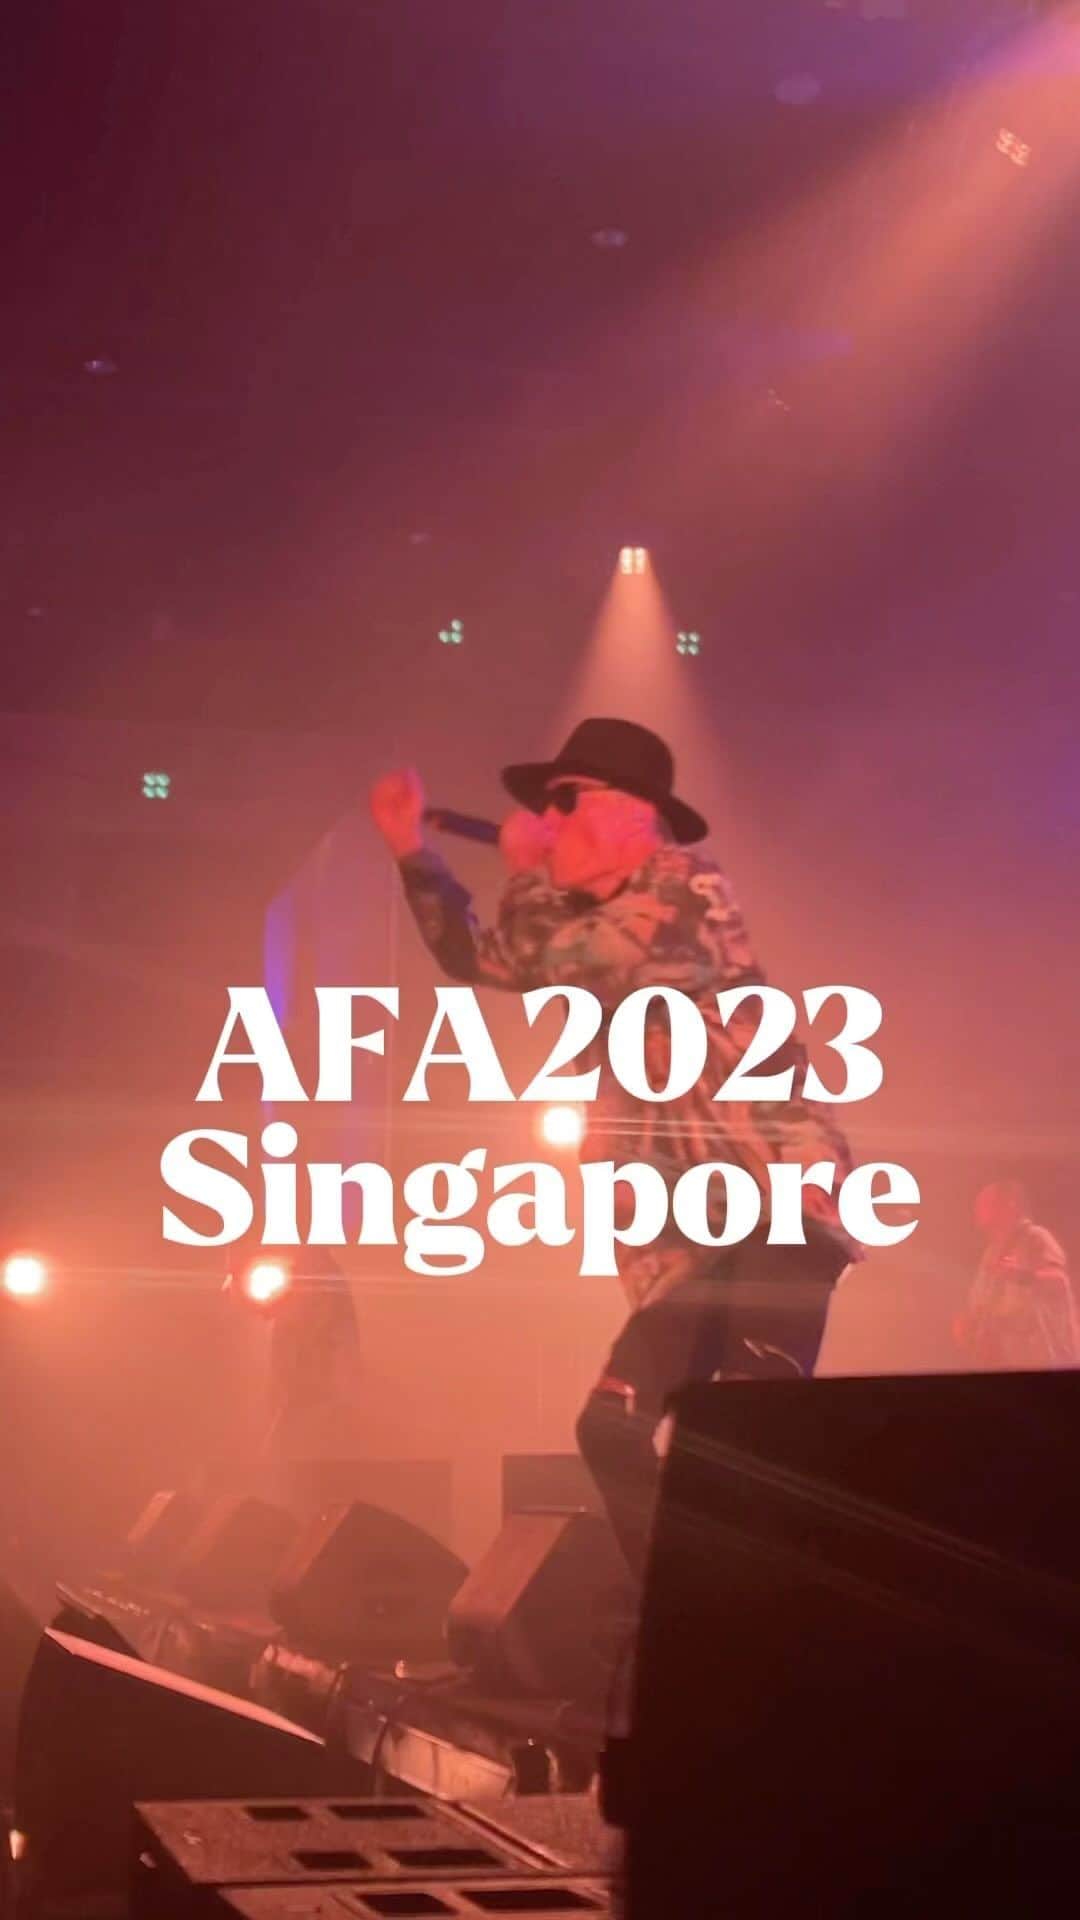 FLOWのインスタグラム：「「Anime Festival Asia Singapore 2023（AFA2023）」に出演しました🔥  ライブを見に来てくれた皆さん、ありがとうございました！✨  またライブでお会いしましょう🎸  We had a great time performing at 「Anime Festival Asia Singapore 2023（AFA2023）」🔥  Thank you to everyone who came to our show✨  Let’s meet again soon!🎸  Use the tag #FLOW_JAPAN when you post your photos and videos!  #japaneseband #anime #animemusic #japanesemusic #jpop #jrock #jmusic  #animefestivalasia#AFA2023 #Singapore #FLOW #FLOW_JAPAN」